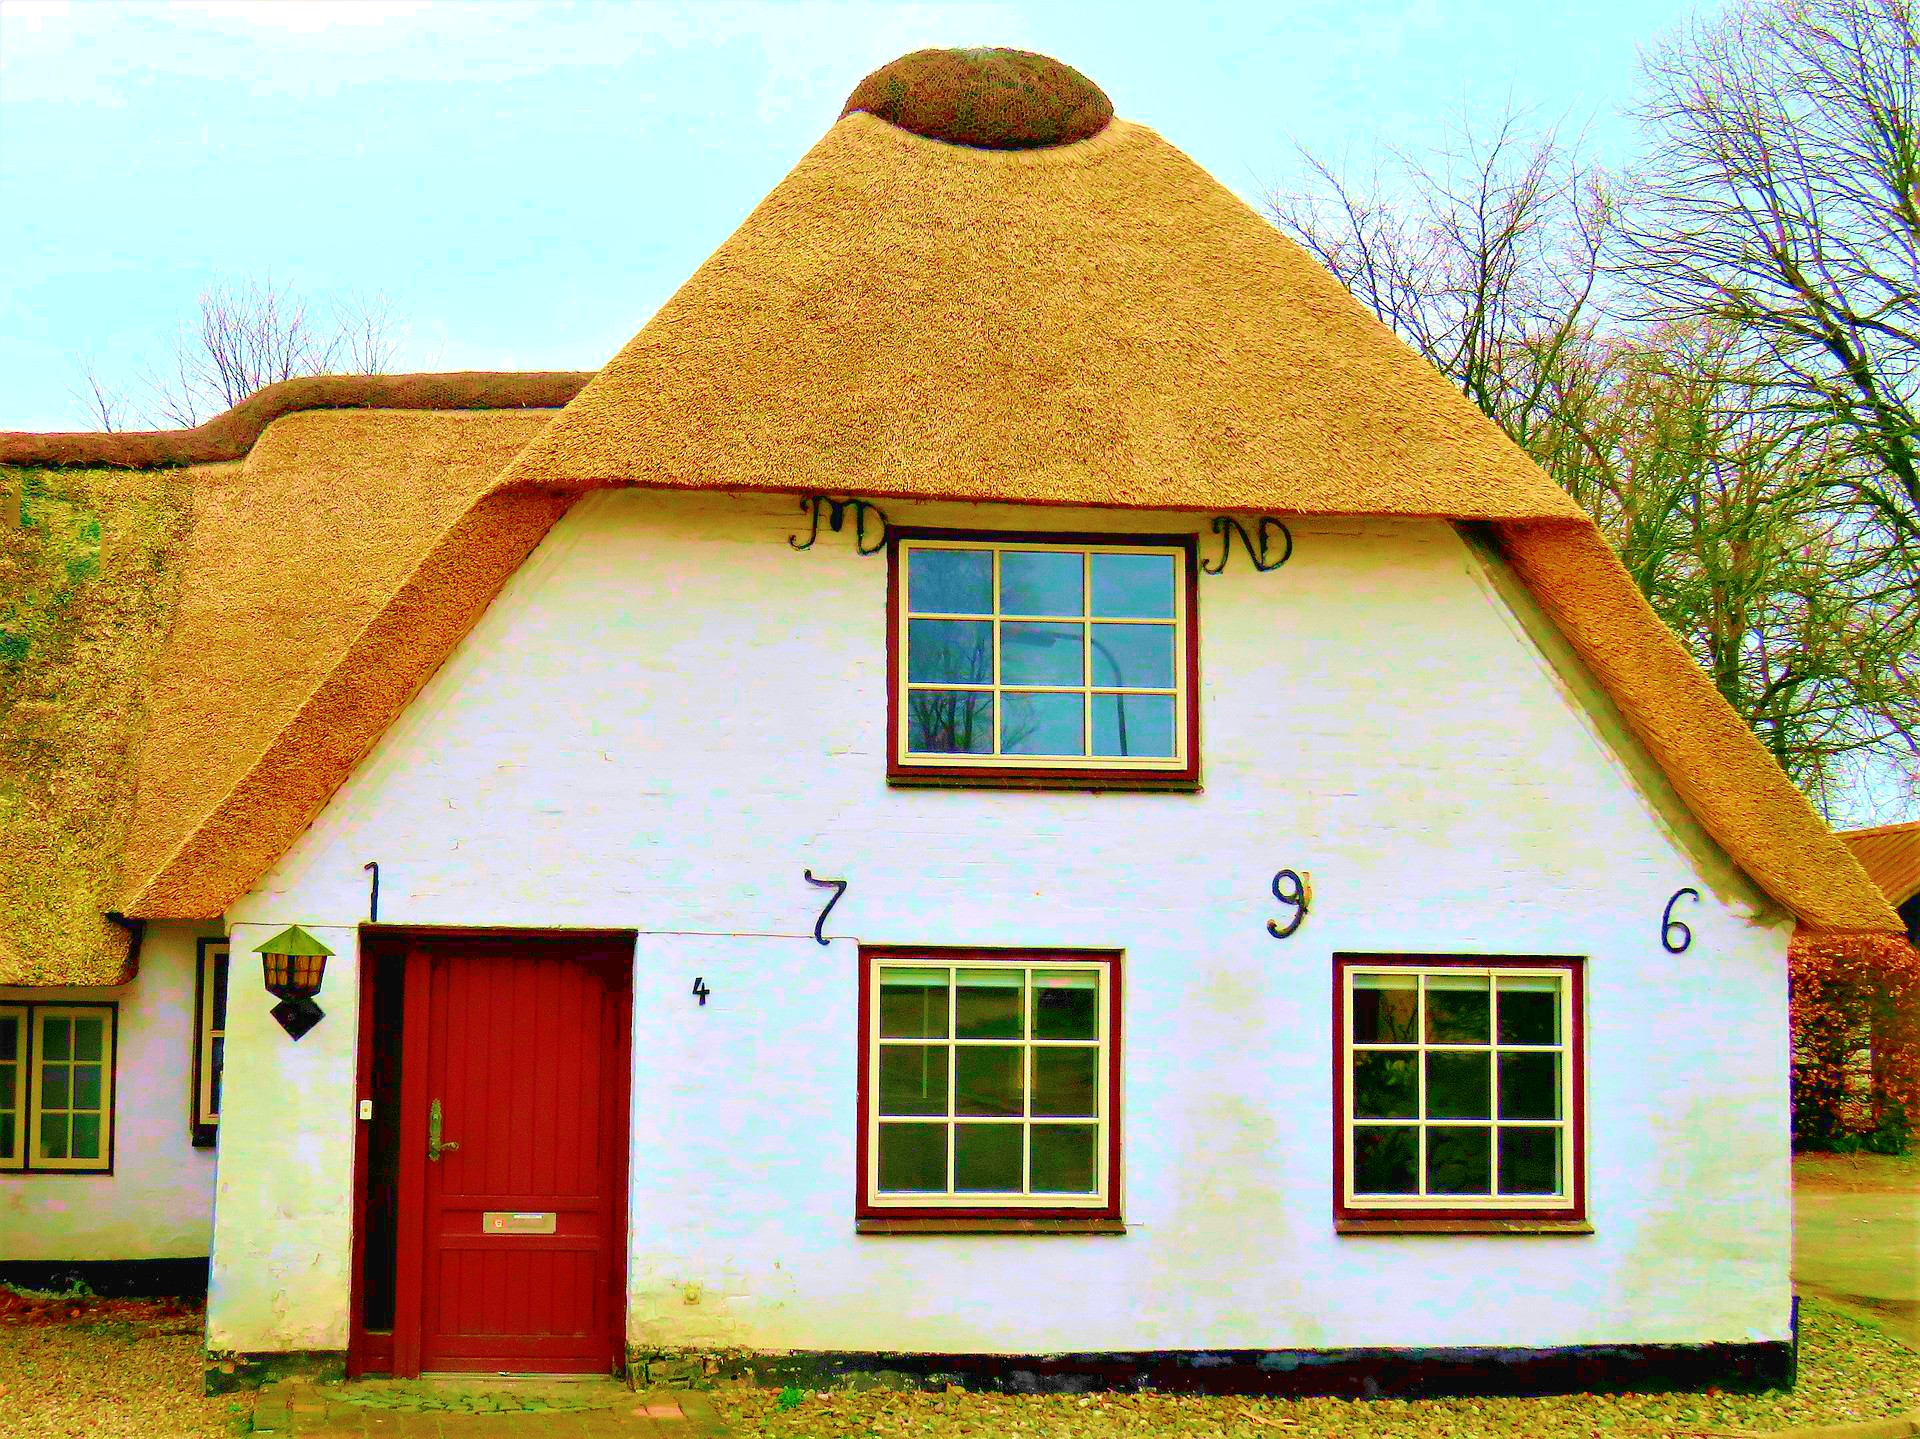 <img src="thatched.jpg" thatched cottage buying your first home"/> 